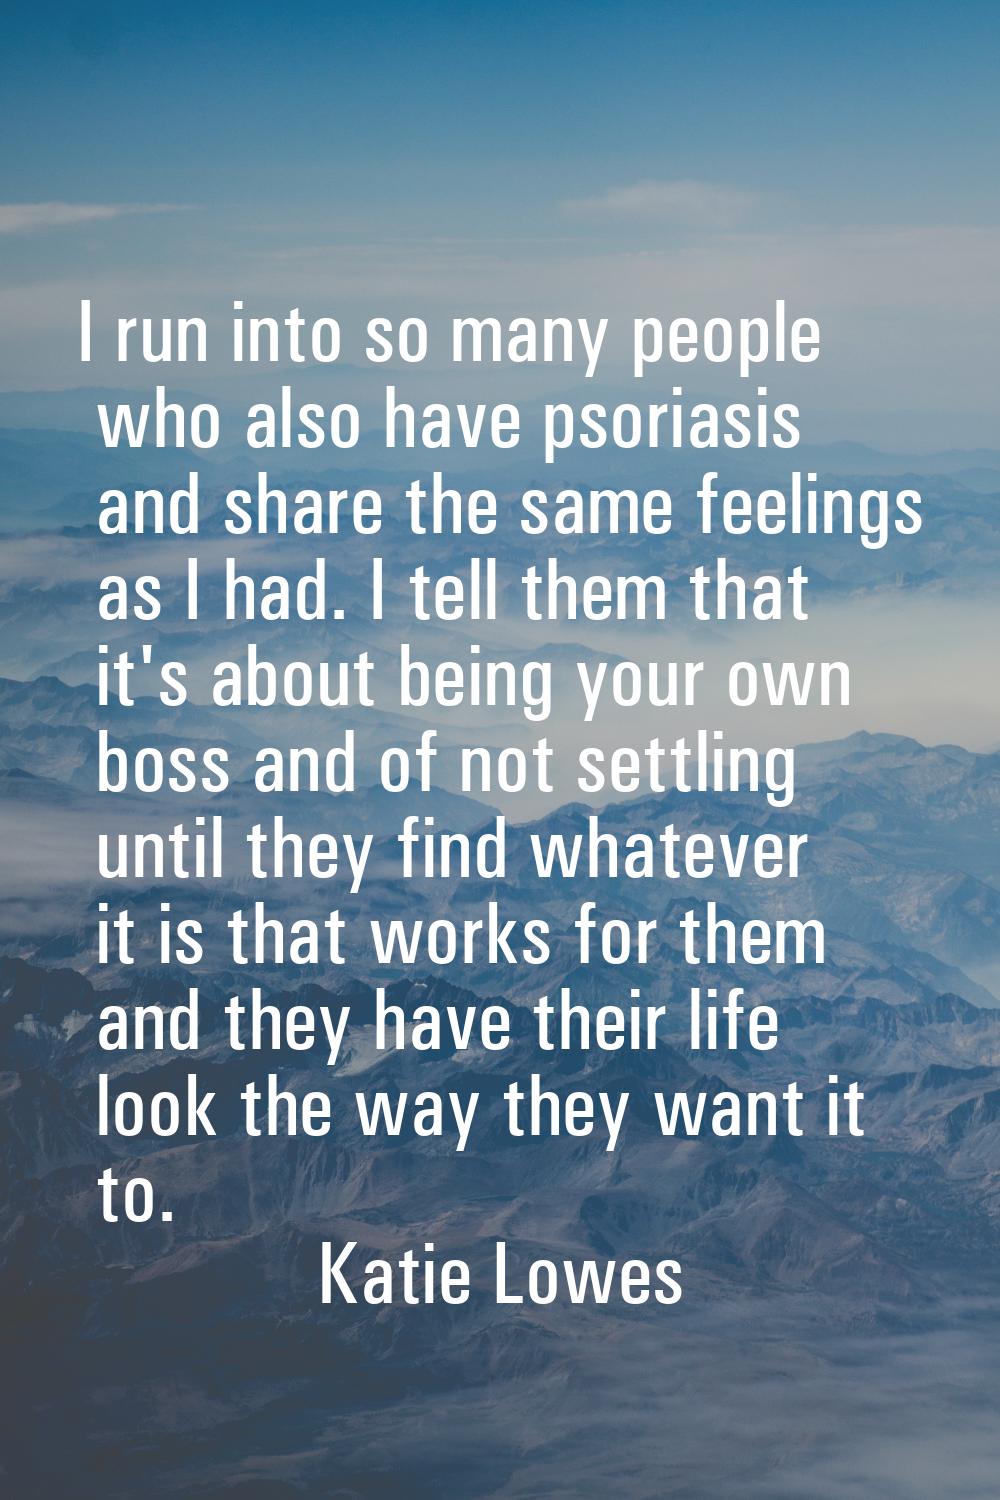 I run into so many people who also have psoriasis and share the same feelings as I had. I tell them